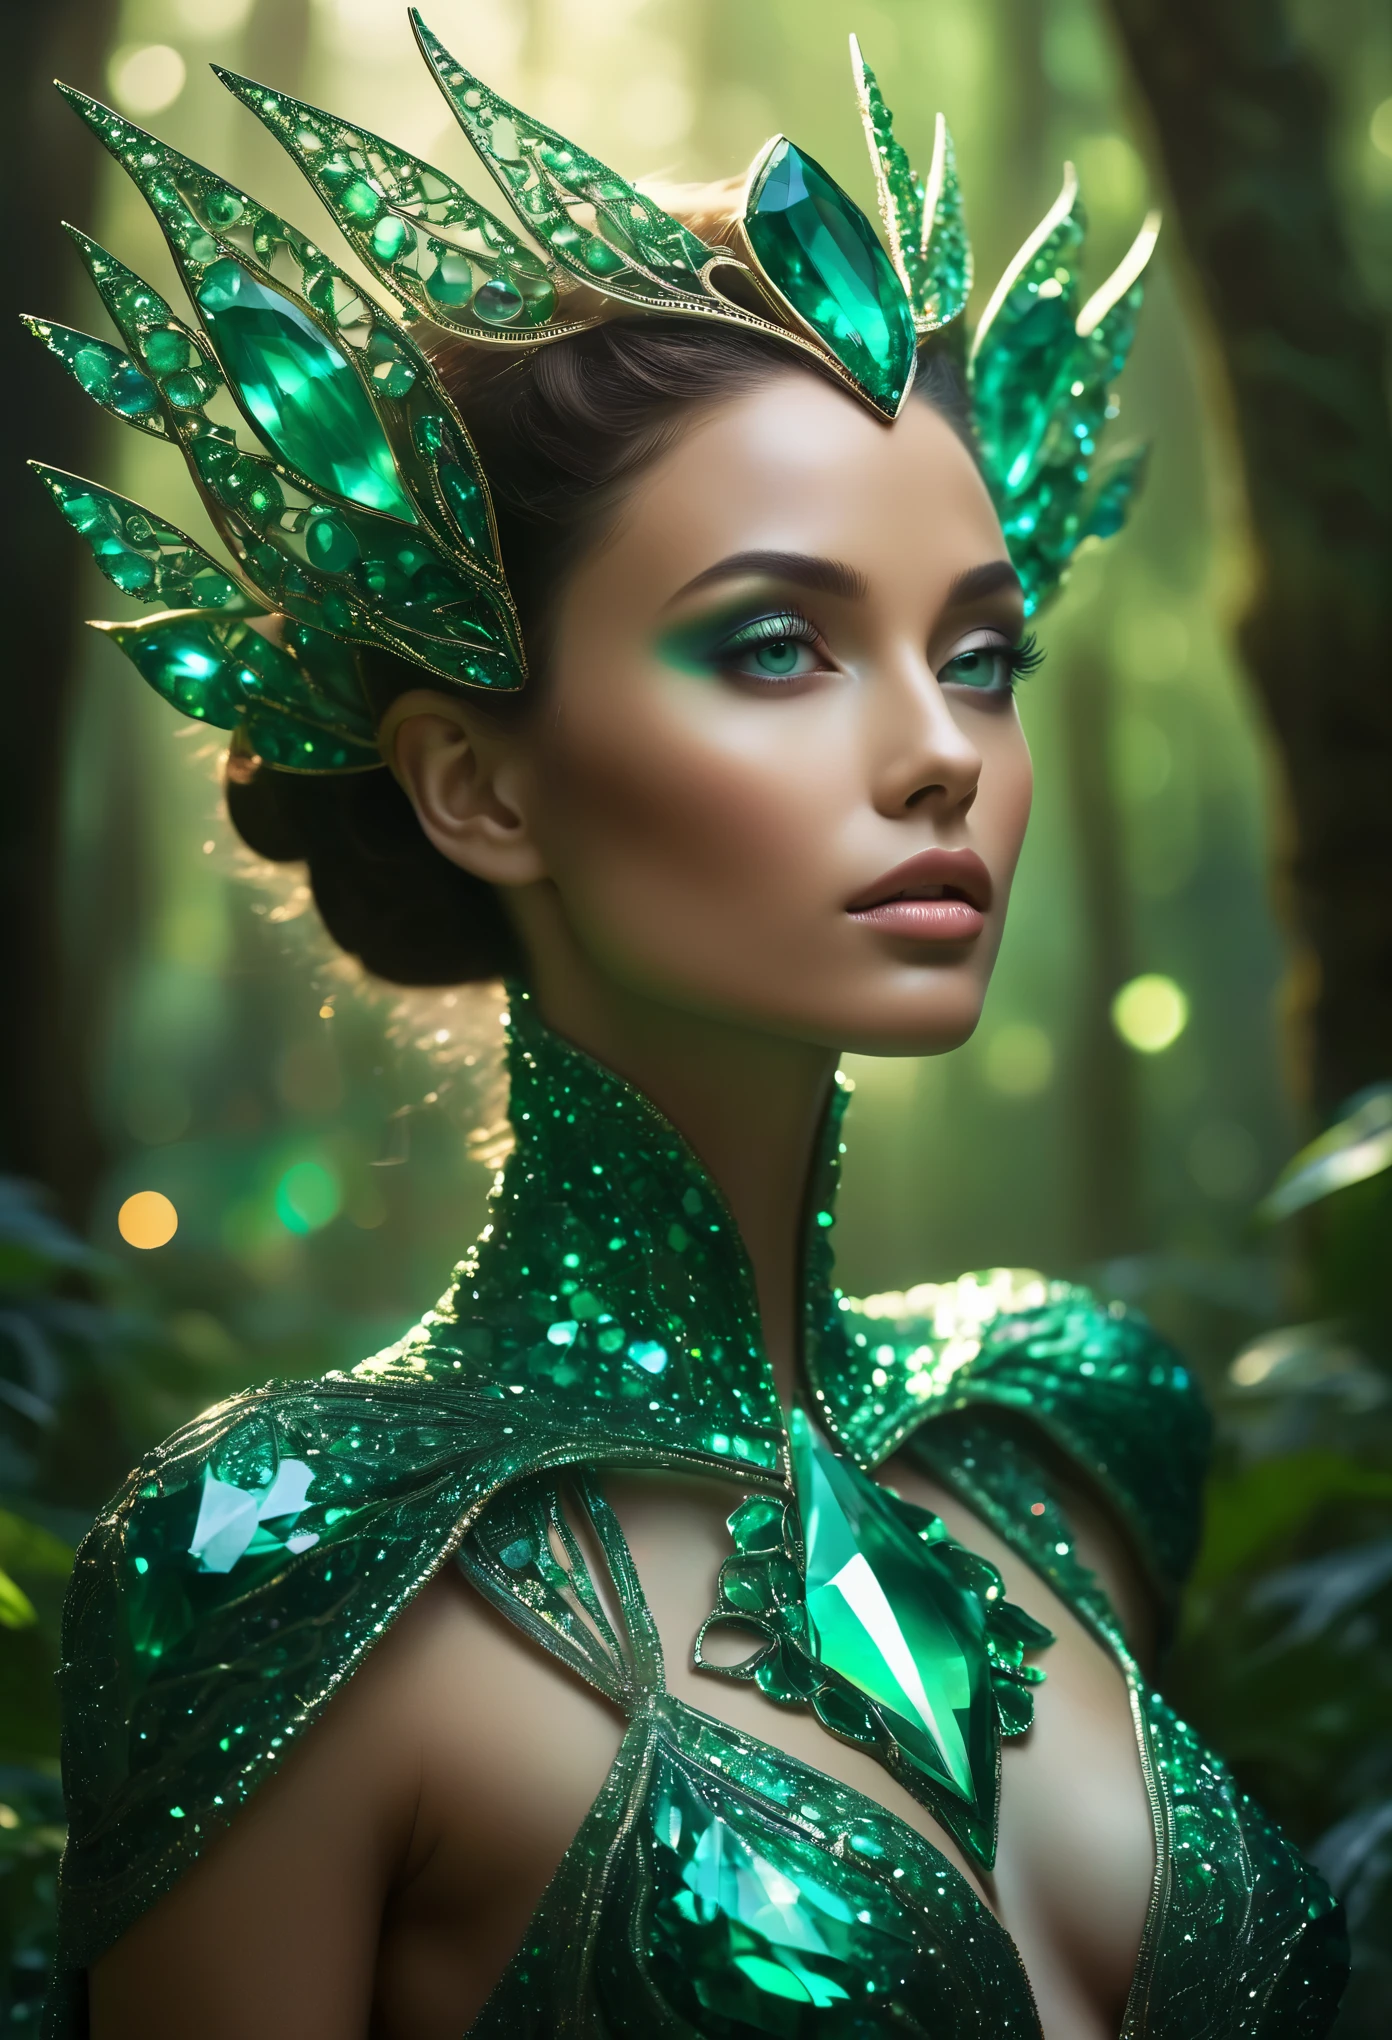 (best quality,highres:1.2),ultra-detailed,(realistic:1.37)
Generate an image of a stunning extraterrestrial girl with a body made entirely of emerald gemstone. She should possess a slender yet graceful physique, with smooth, polished emerald skin that emits a subtle, iridescent shimmer. Her facial features should be delicate and ethereal, with high cheekbones, a softly sculpted jawline, and a slender nose. Her eyes should be large and luminous, with pupils resembling sparkling diamonds set within emerald irises that gleam with an otherworldly radiance.

Her hair should flow around her shoulders and down her back in cascading waves of verdant green, each strand appearing as if it were crafted from pure emerald. The strands should catch the light, refracting it into a dazzling display of colors, like sunlight filtering through a dense forest canopy. Her expression should be serene and enigmatic, with a faint hint of curiosity and wonder shining through her gaze.

Adorn her in elegant yet alien attire, perhaps consisting of flowing robes or garments adorned with intricate patterns reminiscent of celestial constellations. Surround her with an aura of ethereal energy, as if she is bathed in the gentle glow of distant stars, casting subtle reflections on her emerald skin. Capture her in a moment of serene contemplation, as if she is communing with the mysteries of the cosmos.